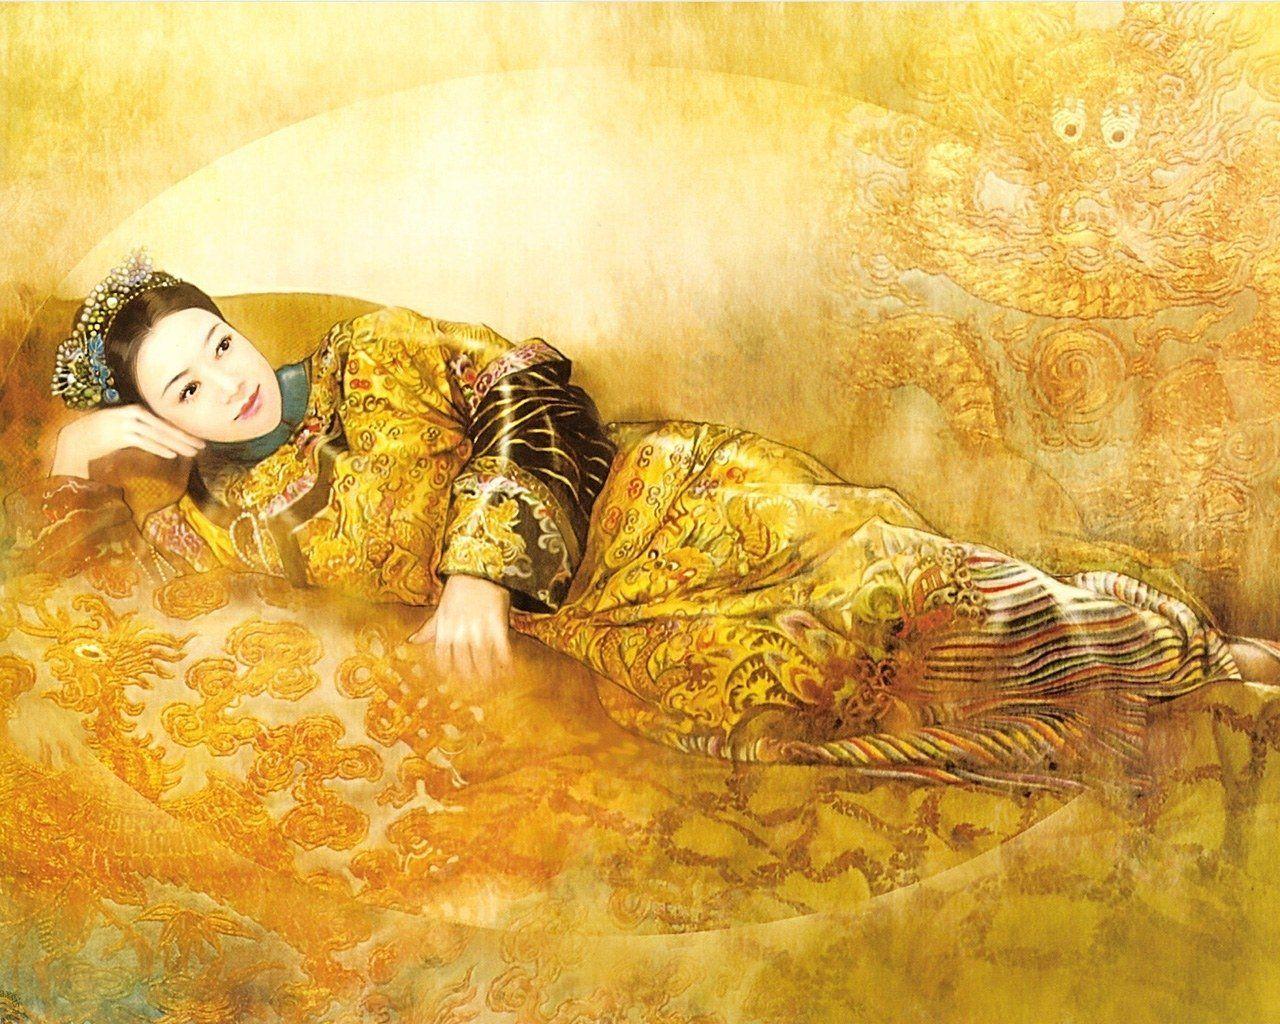 Artistic The Ancient Chinese Beauty Wallpaper and Background Imagex1024